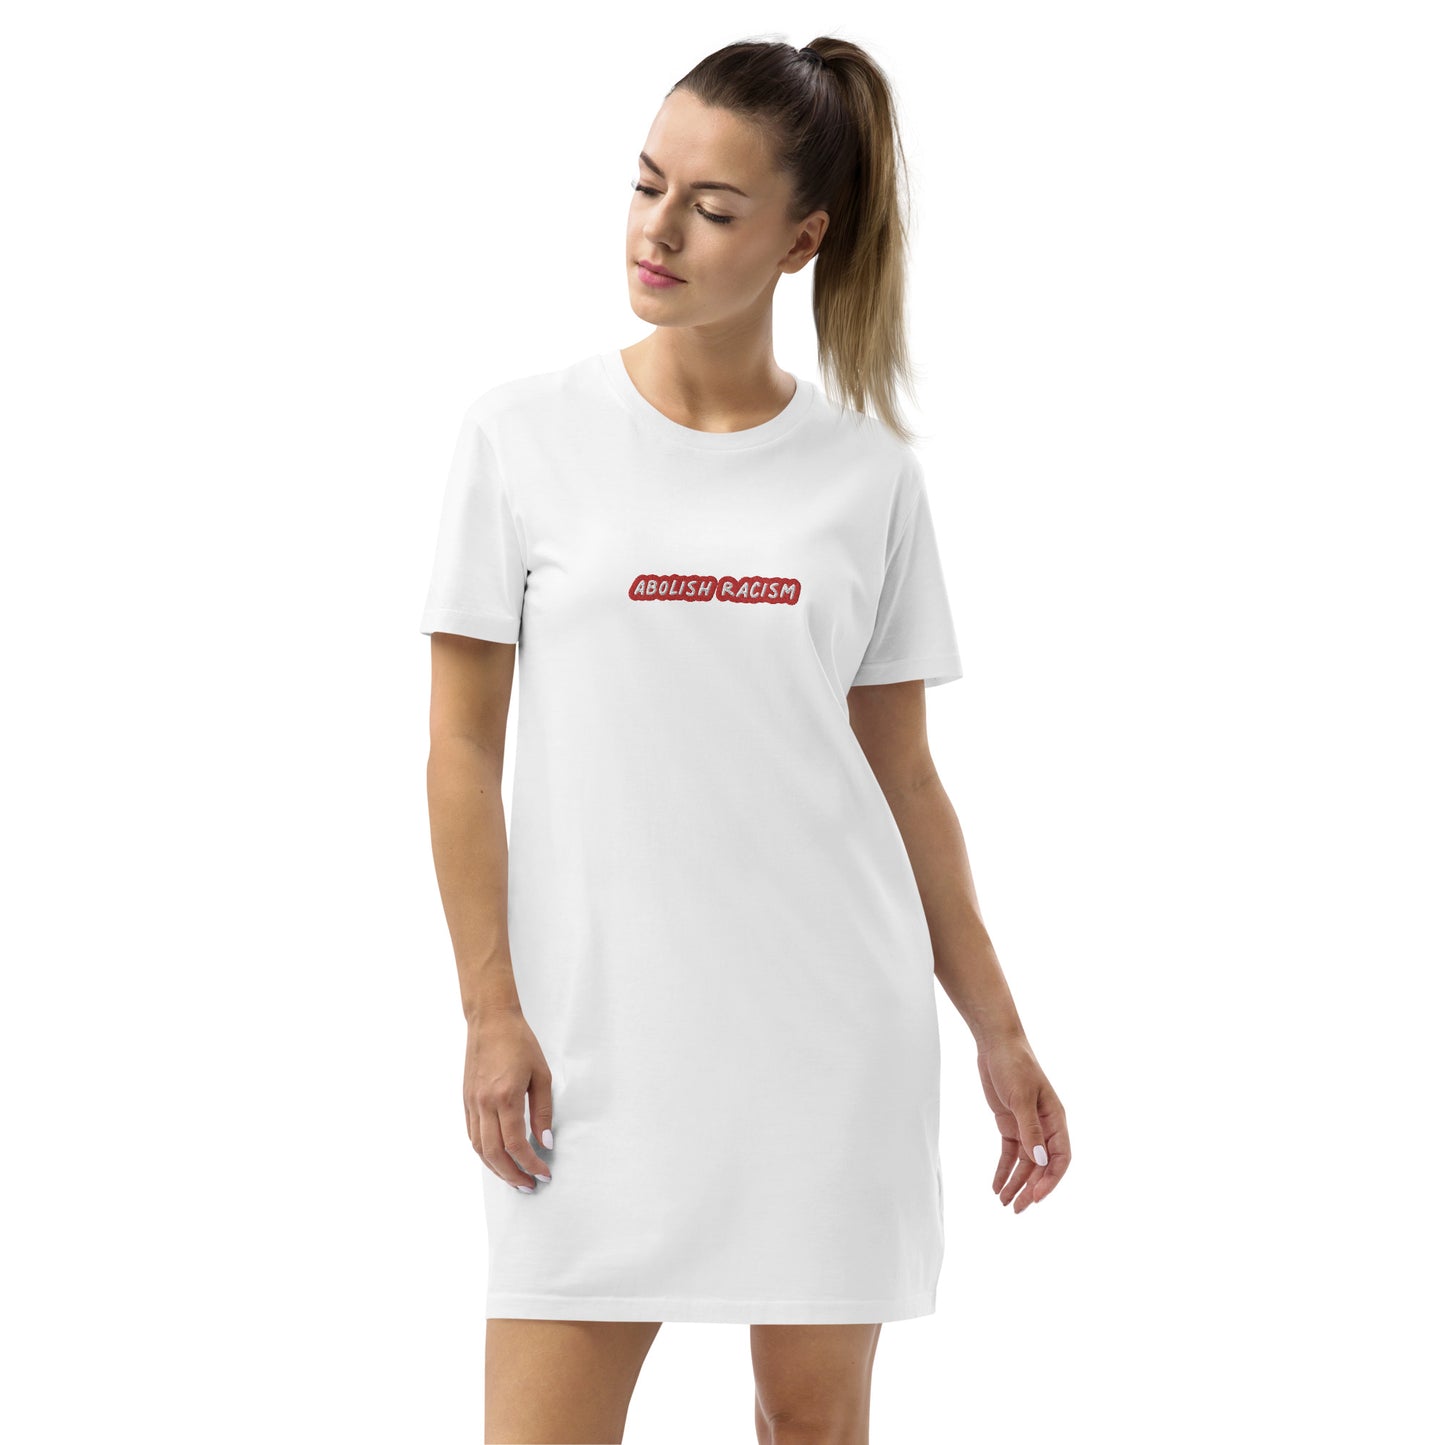 Abolish Racism / Hate Has No Home Here Embroidered T-Shirt Dress